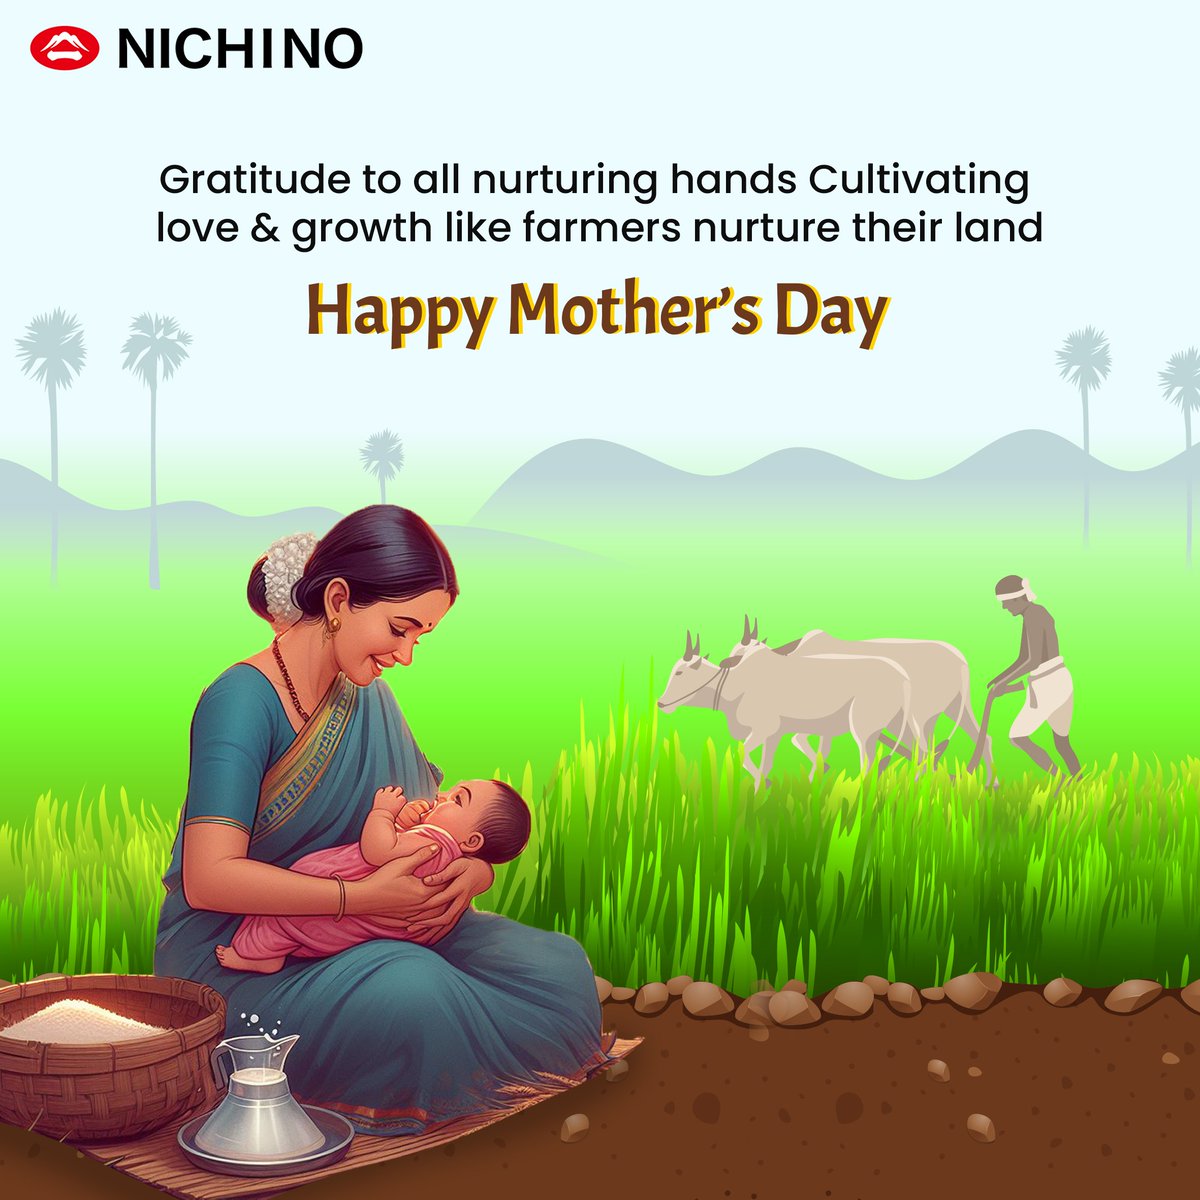 Happy Mother’s Day from our agriculture family to yours!

#mothersday #agriculture #farmers #NichinoIndia